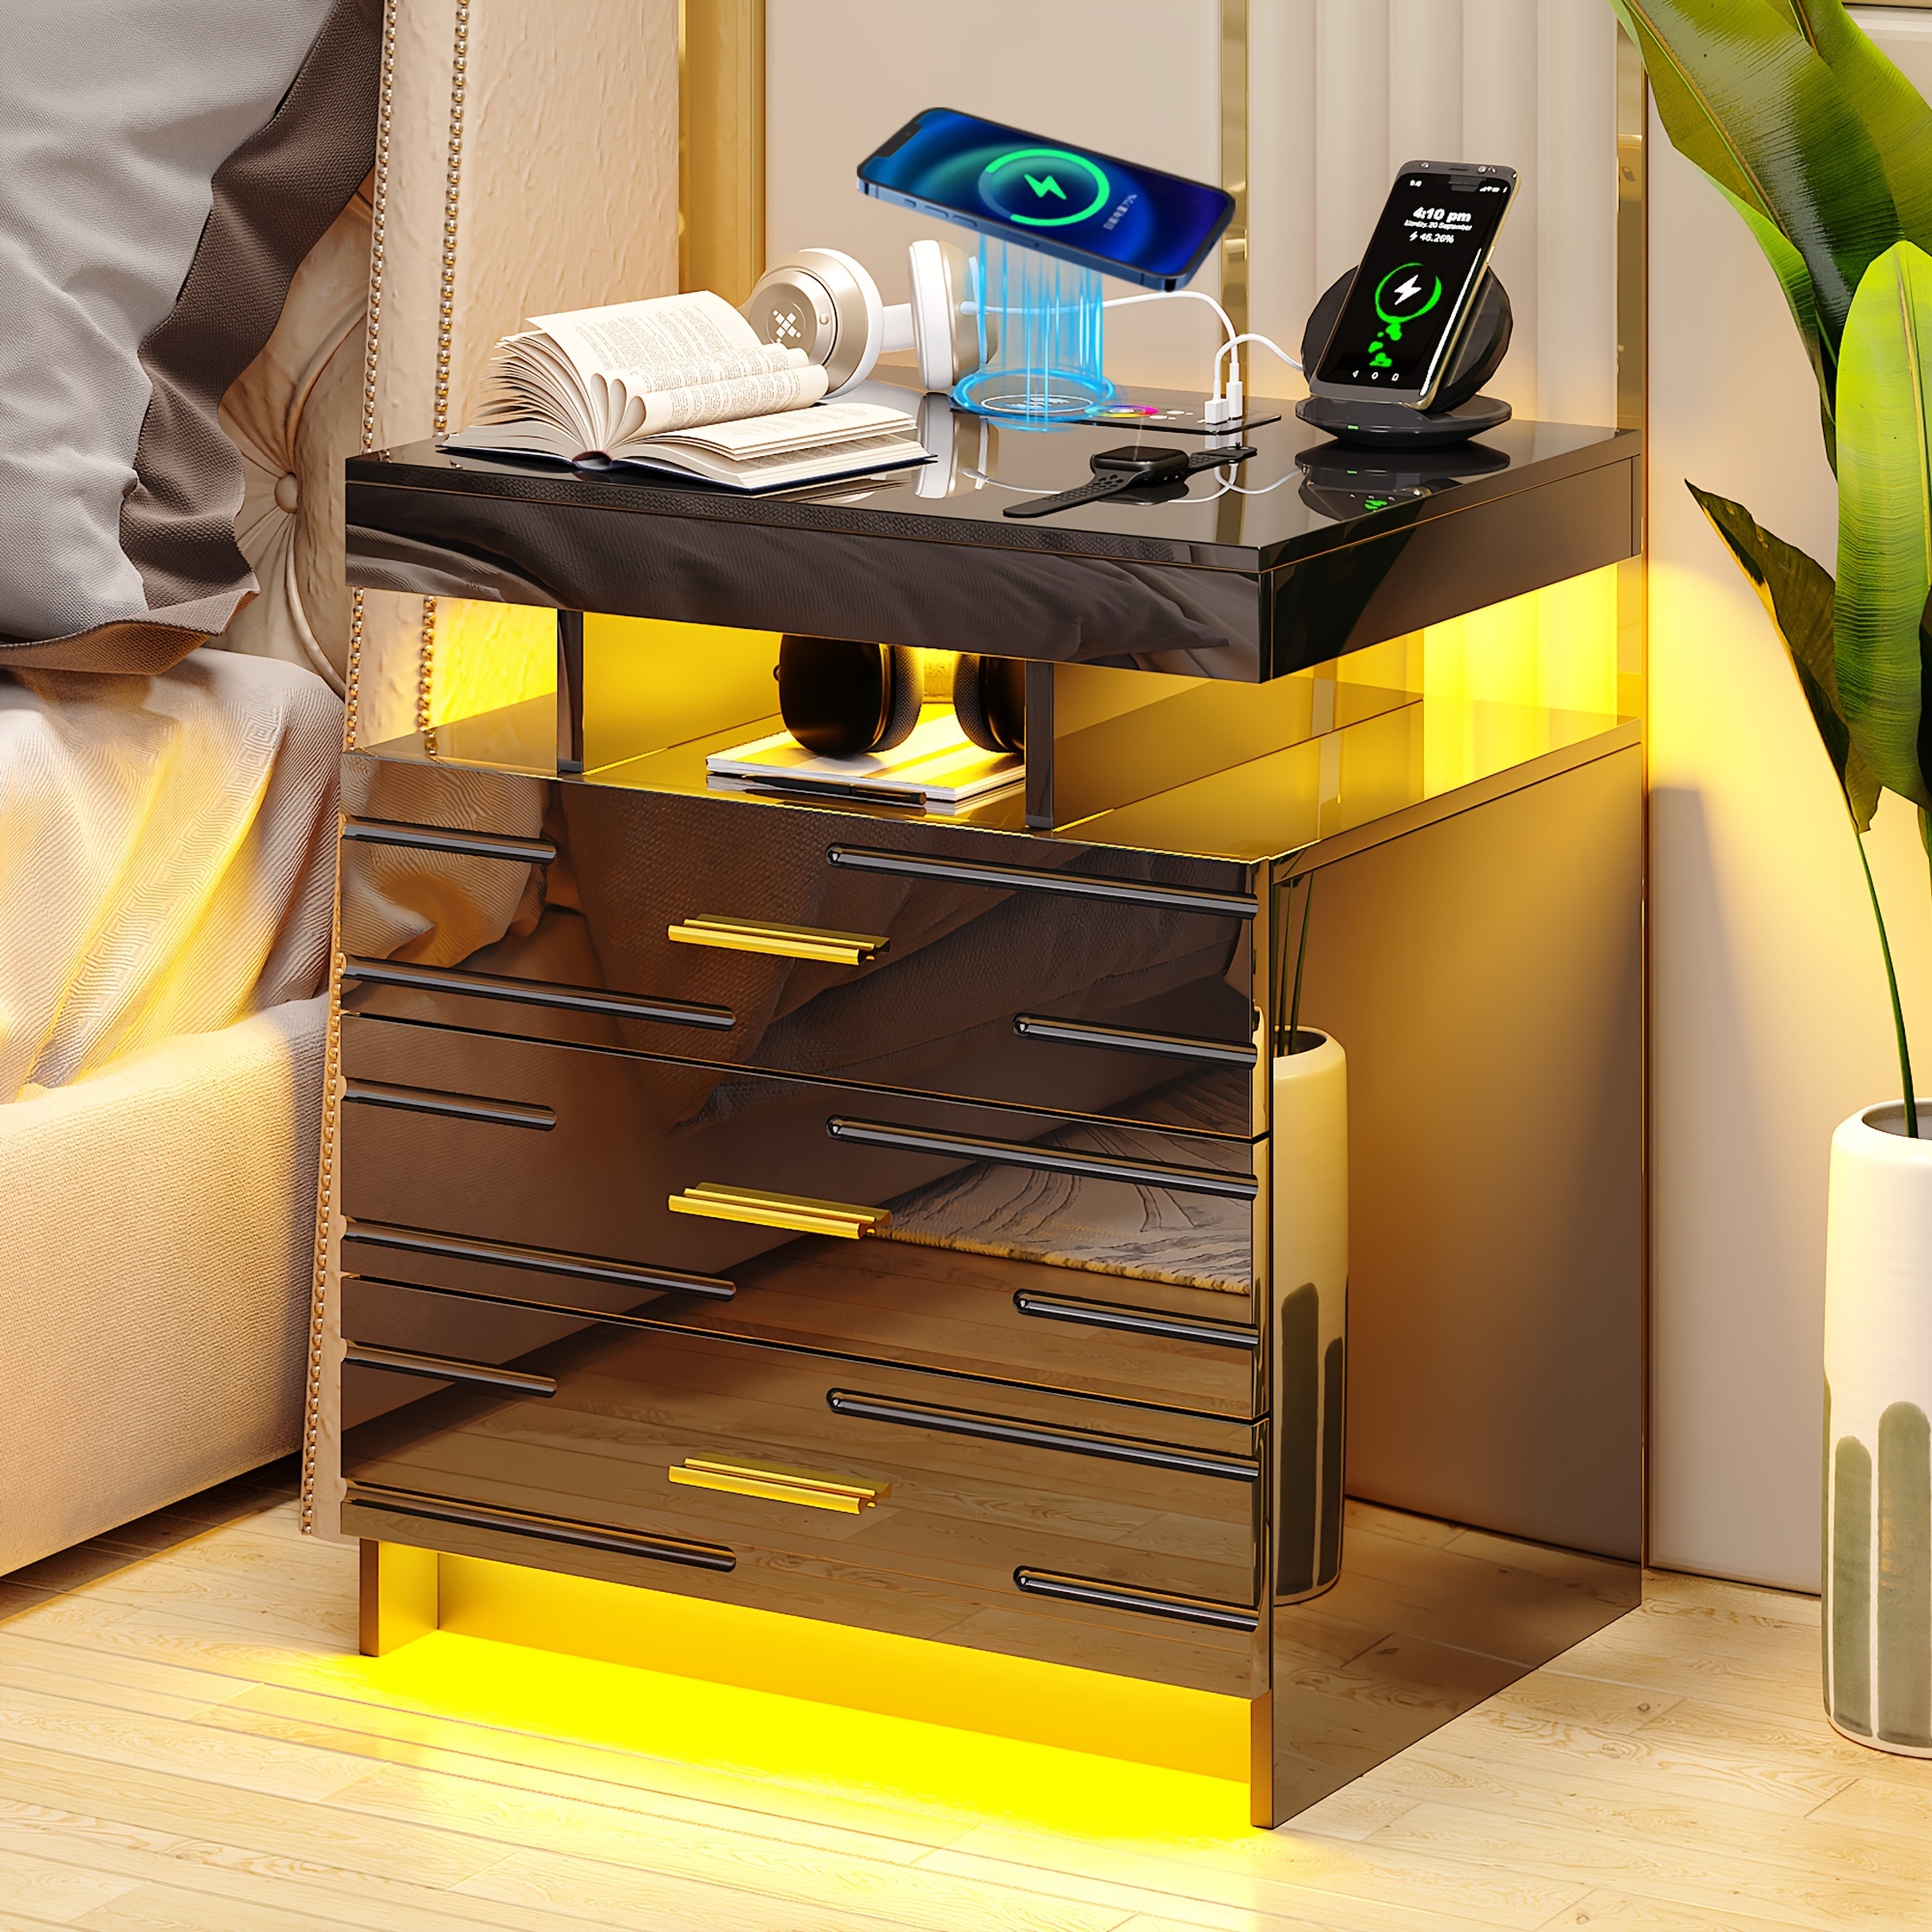 

Atuo Led Nightstand With Wireless Charging Station & Usb Ports, Modern Night Stand With 24 Color Lights, High-gloss Bedside Tables With 3 Drawers For Bedroom, Father's Day Gifts